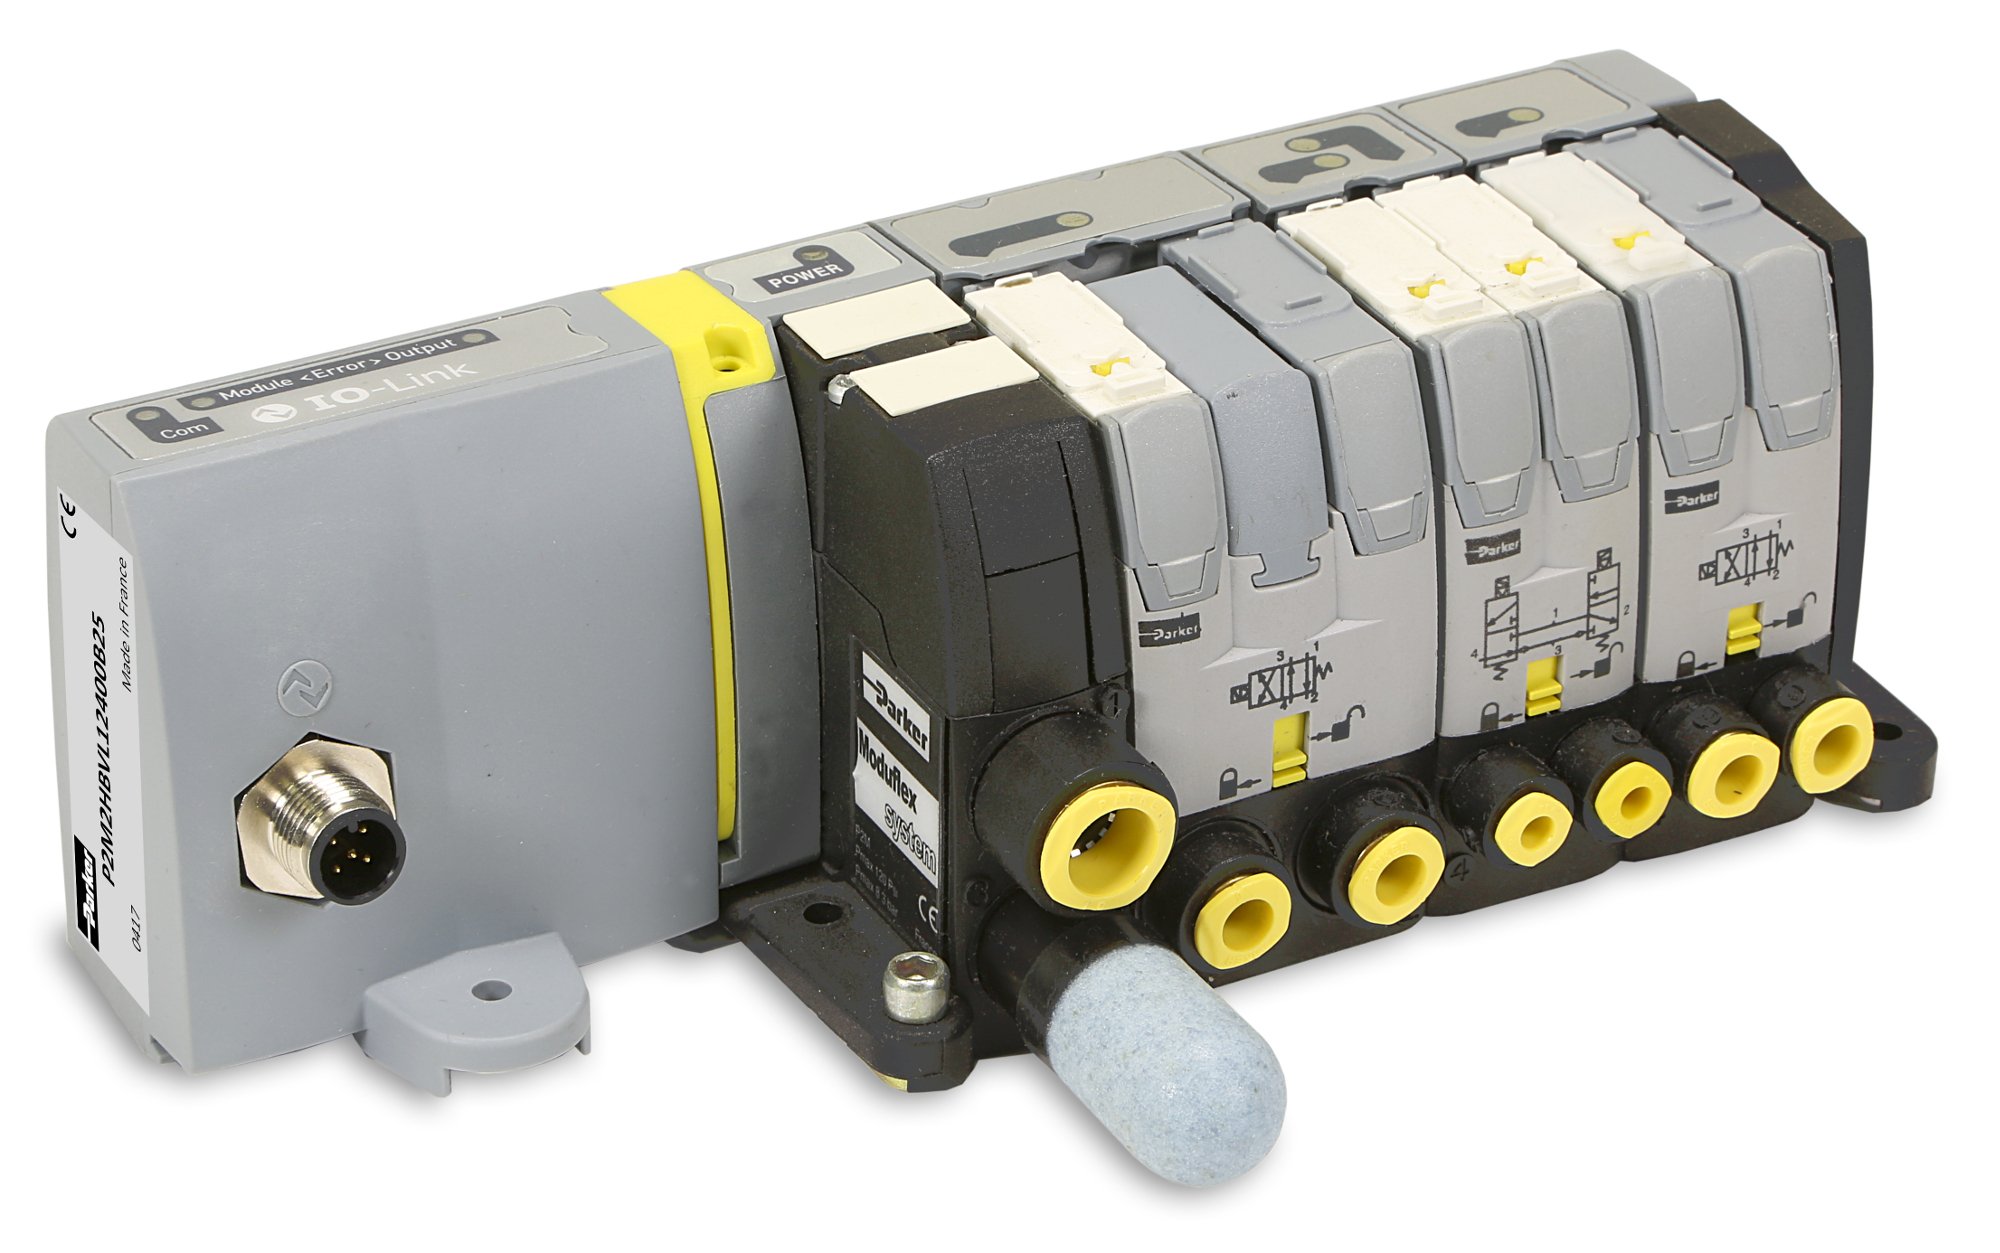 As an example of a modern valve terminal combining modular flow control with electronics, Parker’s Moduflex Valve System receives electrical control signals over a field bus connection for electro-pneumatic automation applications. But it lacks some of the characteristics of a true cyber-physical system, including intelligent onboard sensing and control as well as flexible, software-executed reconfiguration. Source: Parker Hannifin Corporation